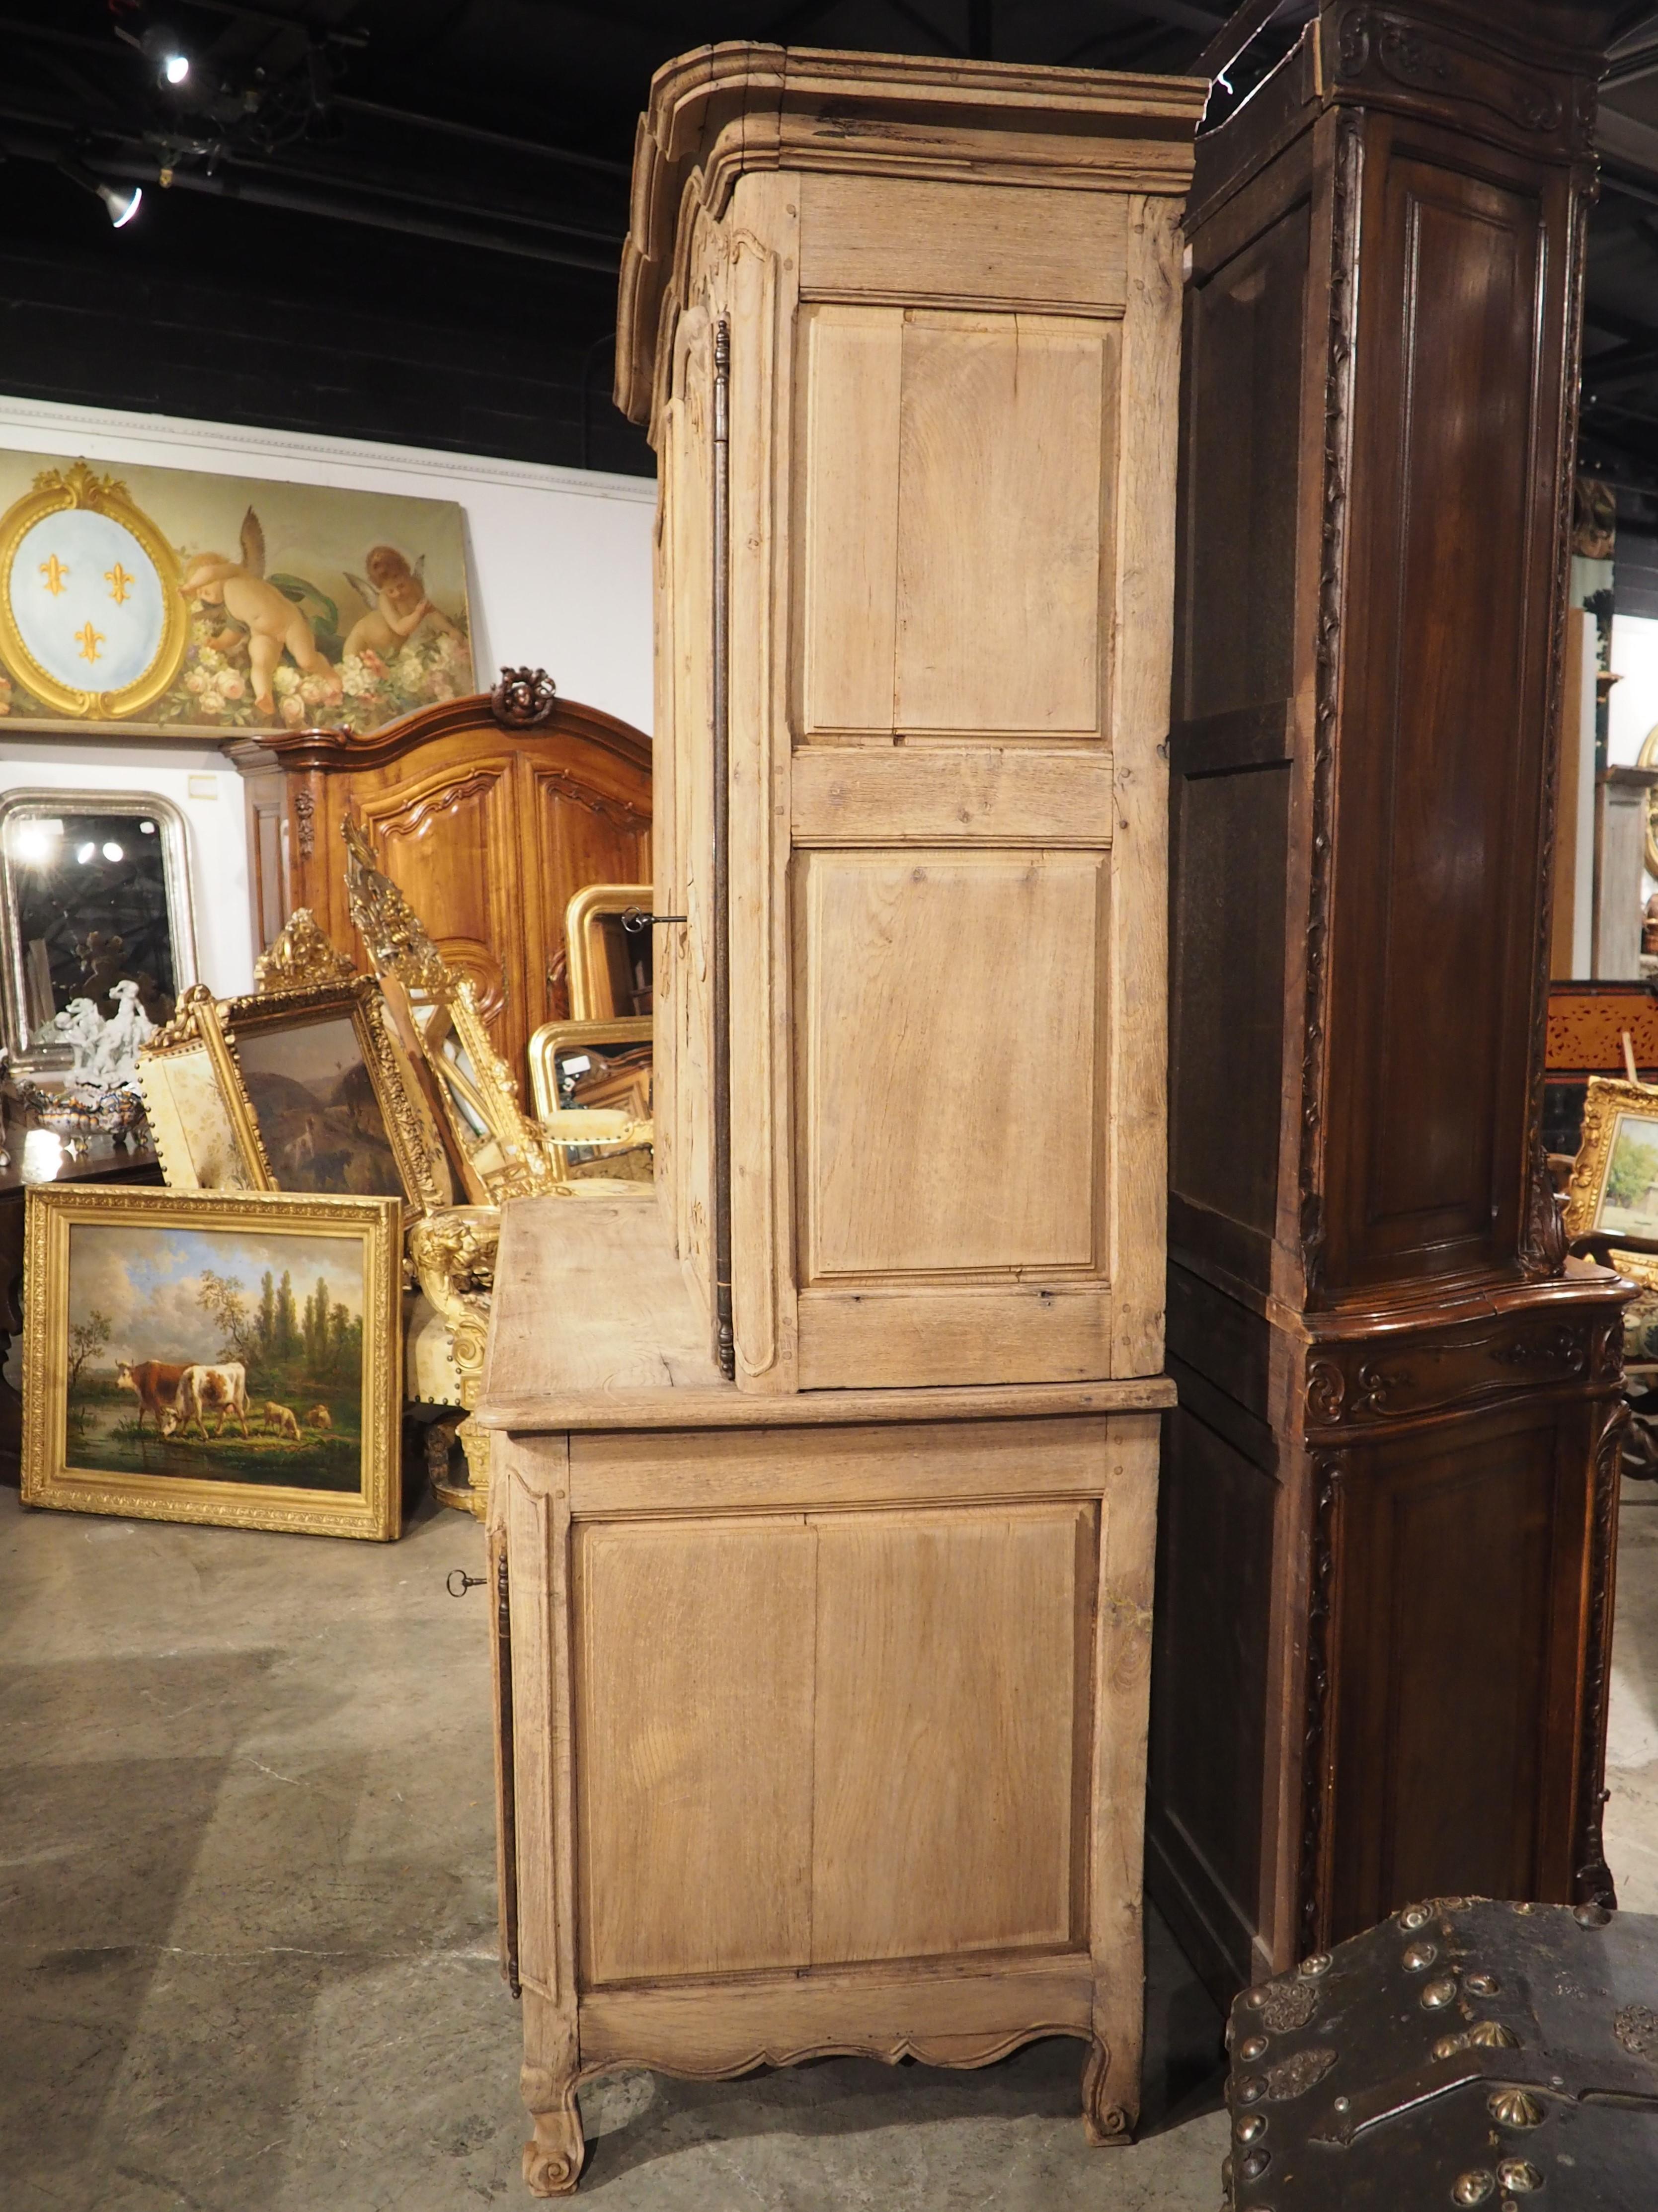 Hand-carved in Laval, France, circa 1730, this oak buffet deux corps has been bleached, allowing the motifs of the Louis XV cabinet to gain prominence. Laval is a town less than 200 miles west of Paris and its proximity to the capital allowed local